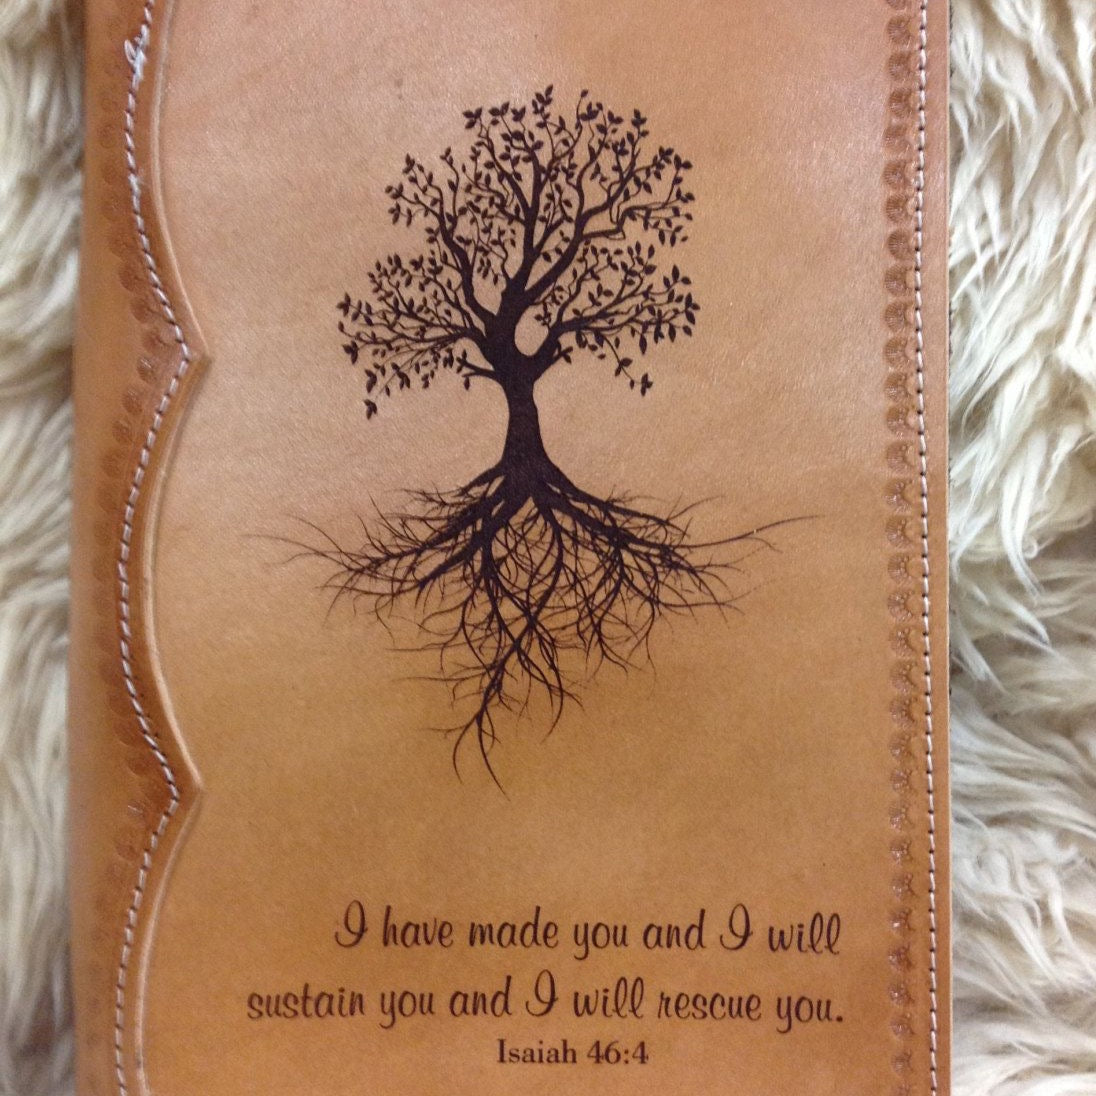 Would you like Custom Engraving on your Journal? - Grierson Studio